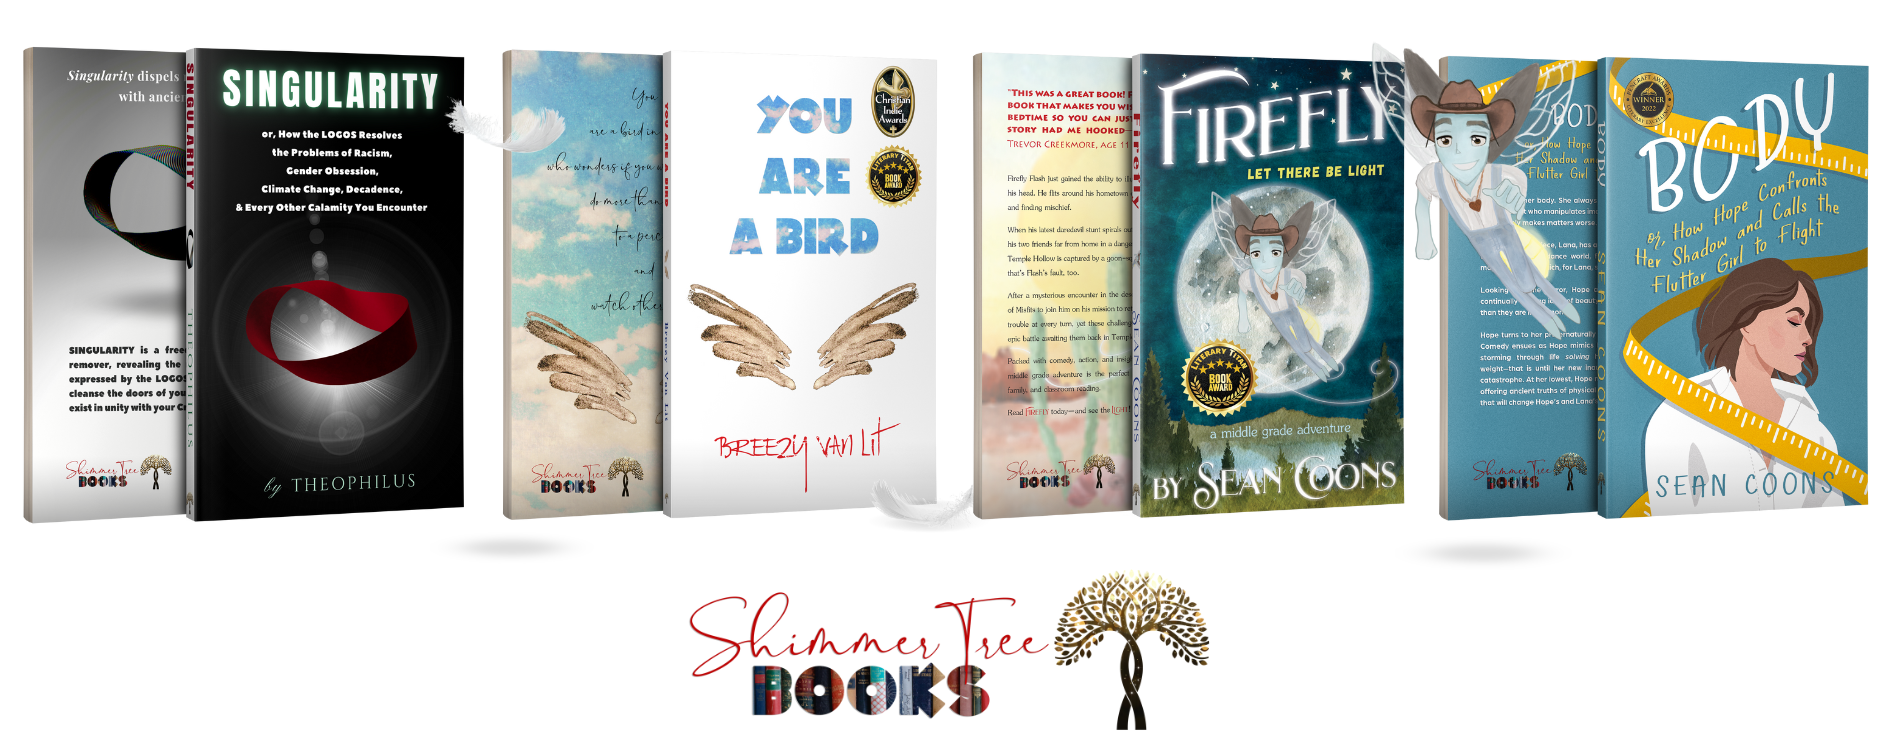 Books by Sean Coons, Breezy Van Lit, and Theophilus - Shimmer Tree Books